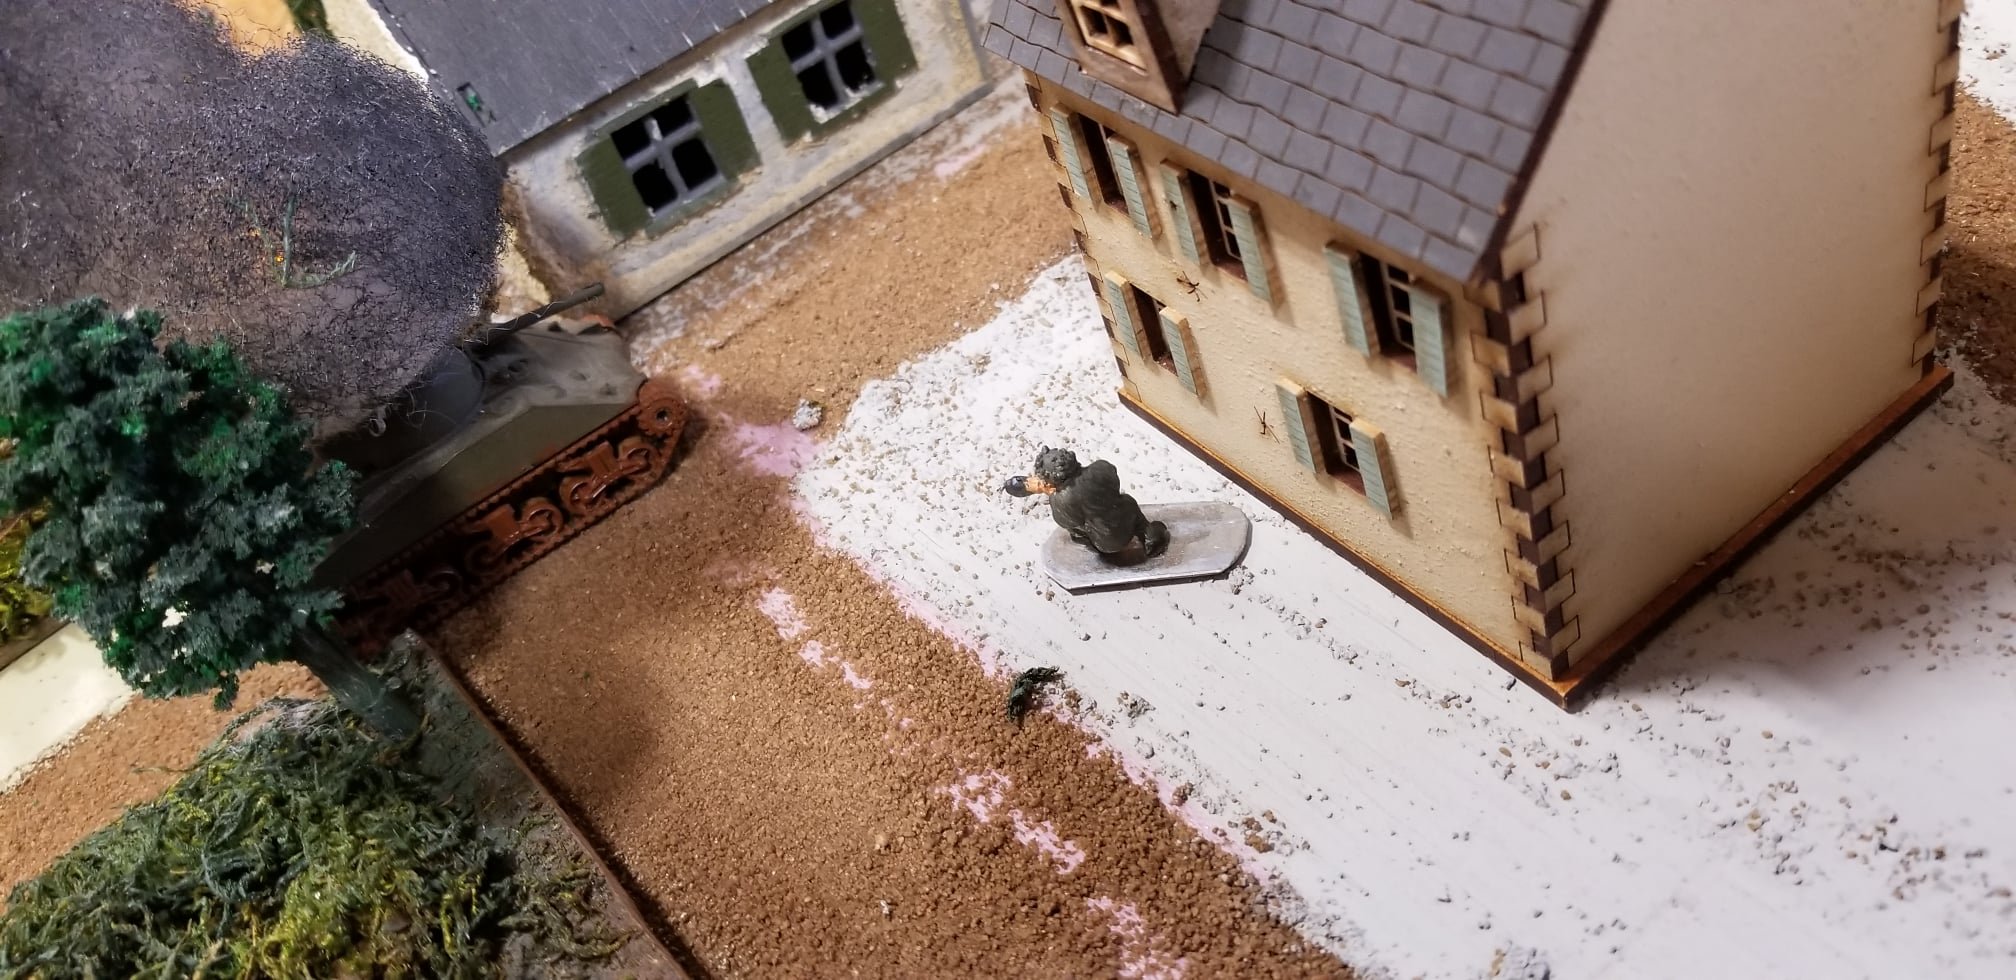 A grenadier then takes out the Sherman...it only gets one shot but made the most of it with its 11 strike dice.